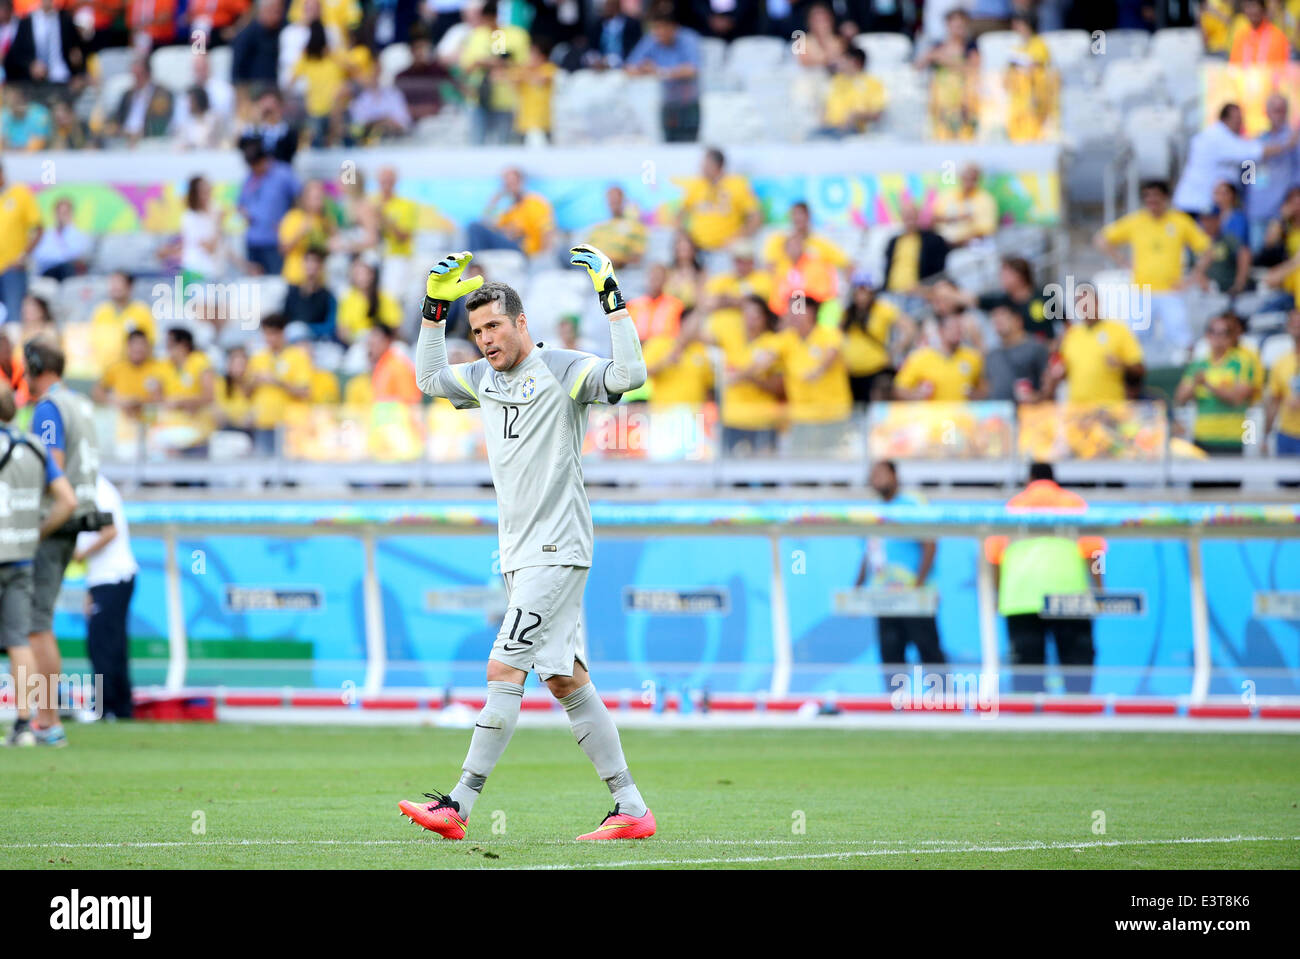 Belo Horizonte, Brazil. 28th June, 2014. Brazil's goalkeeper Julio Cesar reacts before the extra time of a Round of 16 match between Brazil and Chile of 2014 FIFA World Cup at the Estadio Mineirao Stadium in Belo Horizonte, Brazil, on June 28, 2014. Credit:  Li Ming/Xinhua/Alamy Live News Stock Photo